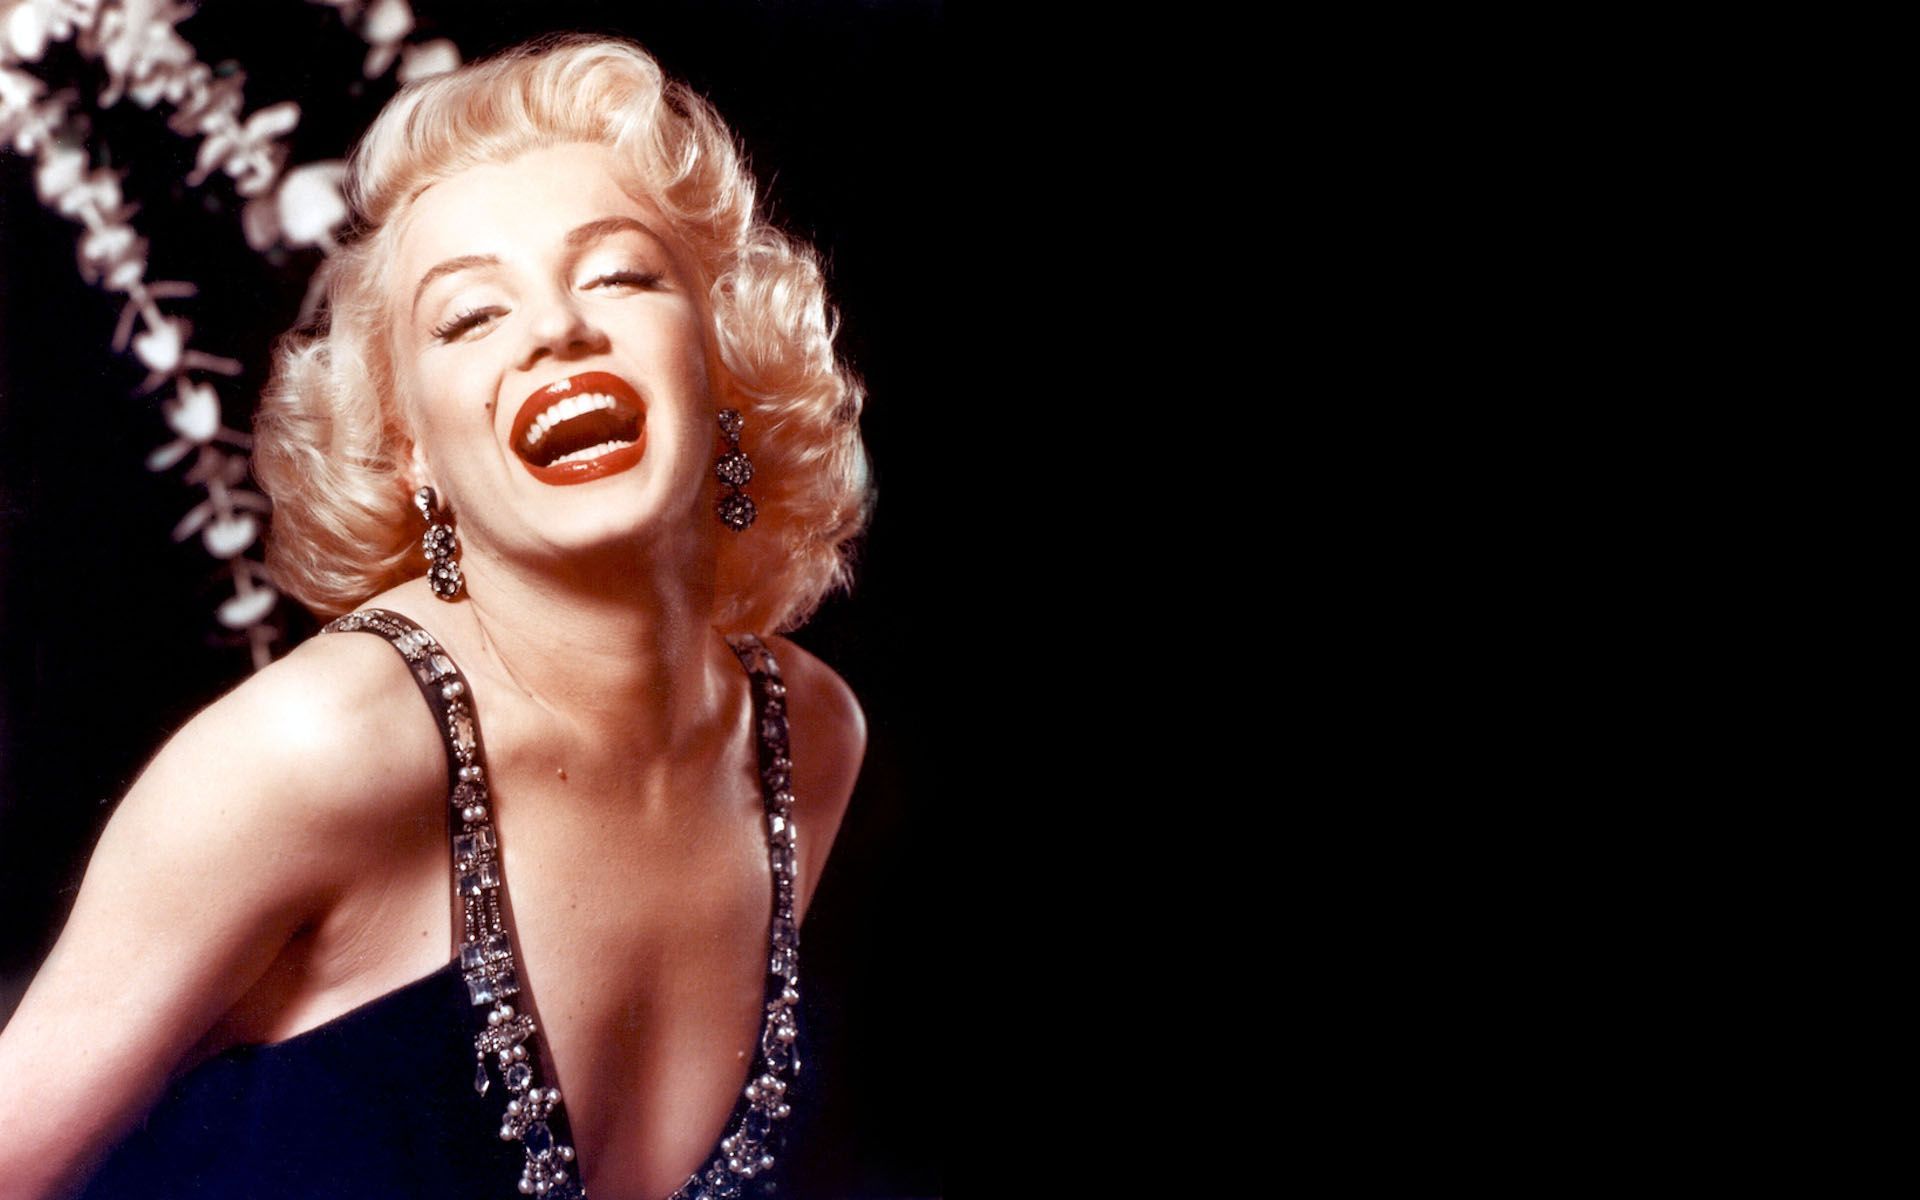 Top Wallpapers Marilyn Monroe 14090 Images for Pinterest